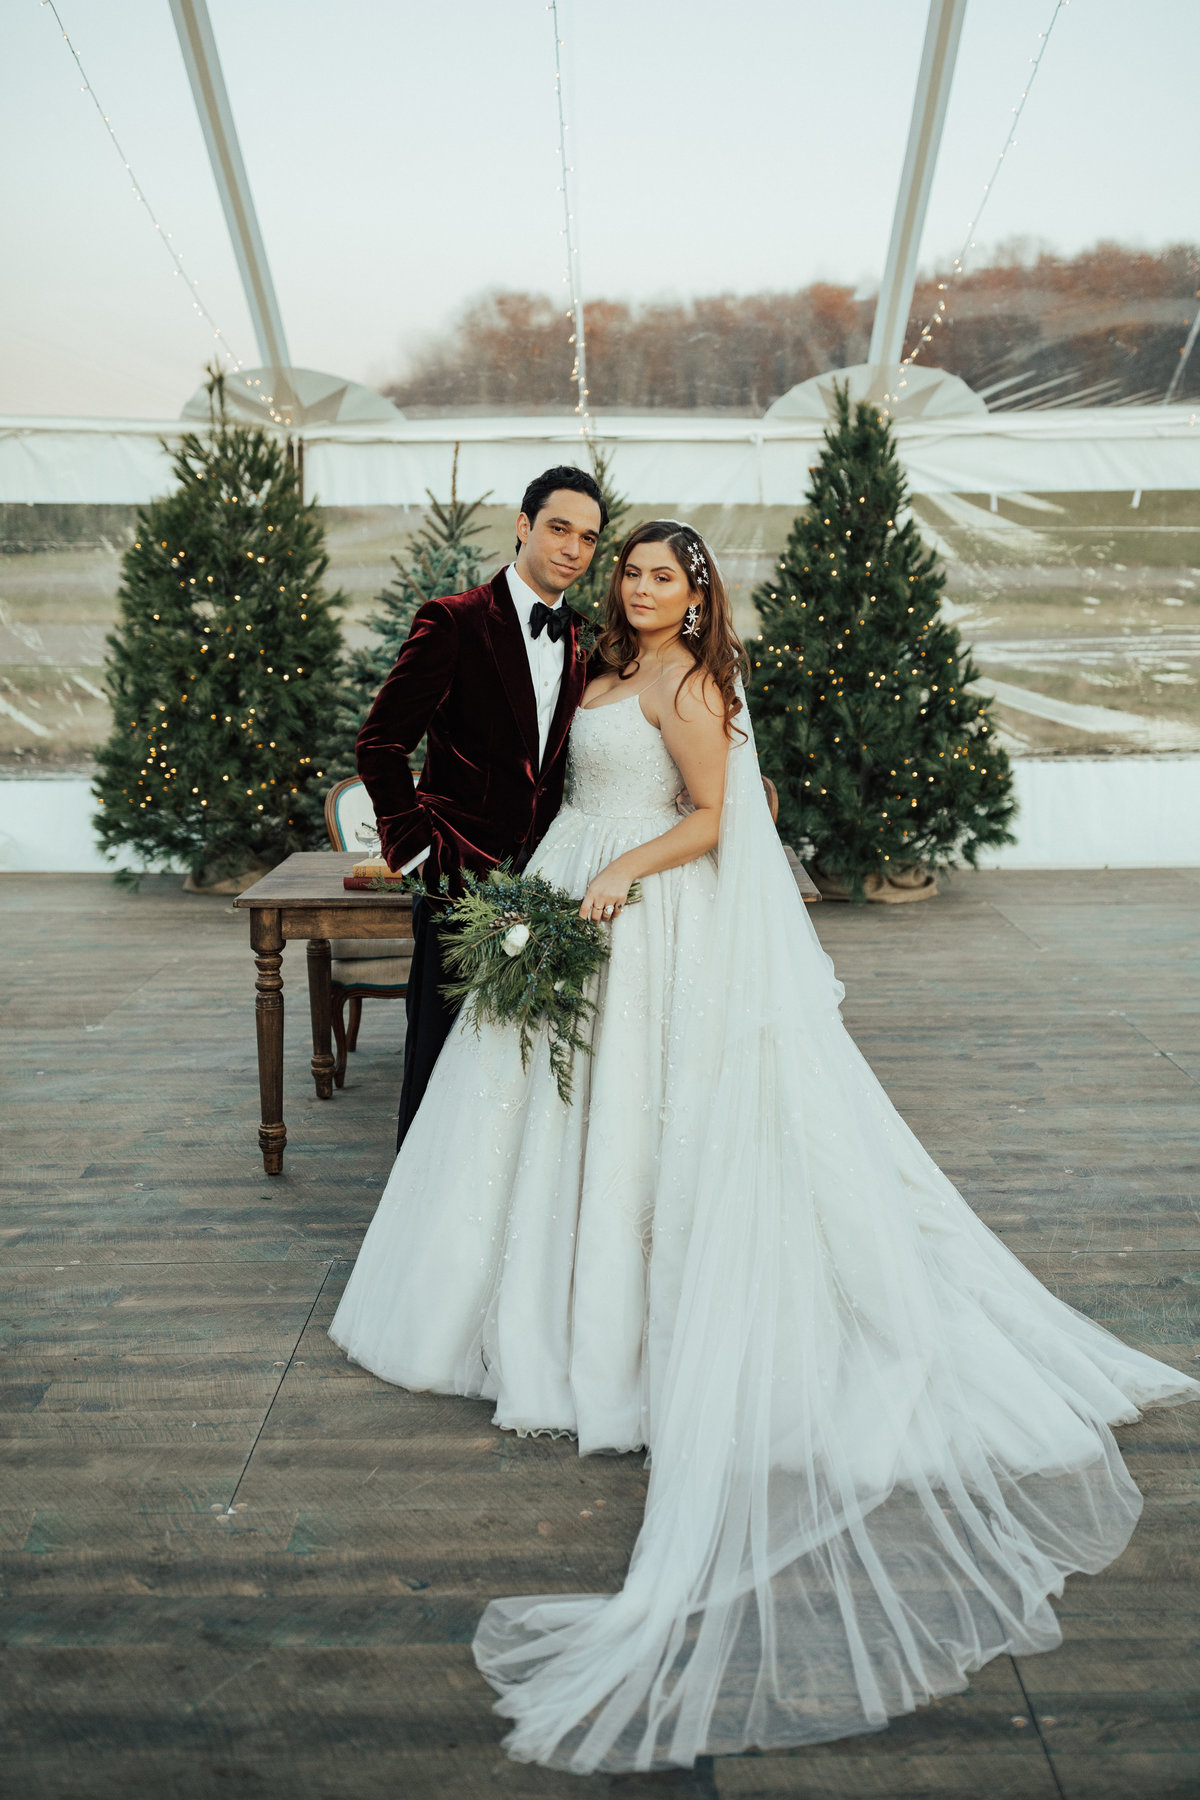 Christy-l-Johnston-Photography-Monica-Relyea-Events-Noelle-Downing-Instagram-Noelle_s-Favorite-Day-Wedding-Battenfelds-Christmas-tree-farm-Red-Hook-New-York-Hudson-Valley-upstate-november-2019-AP1A9168